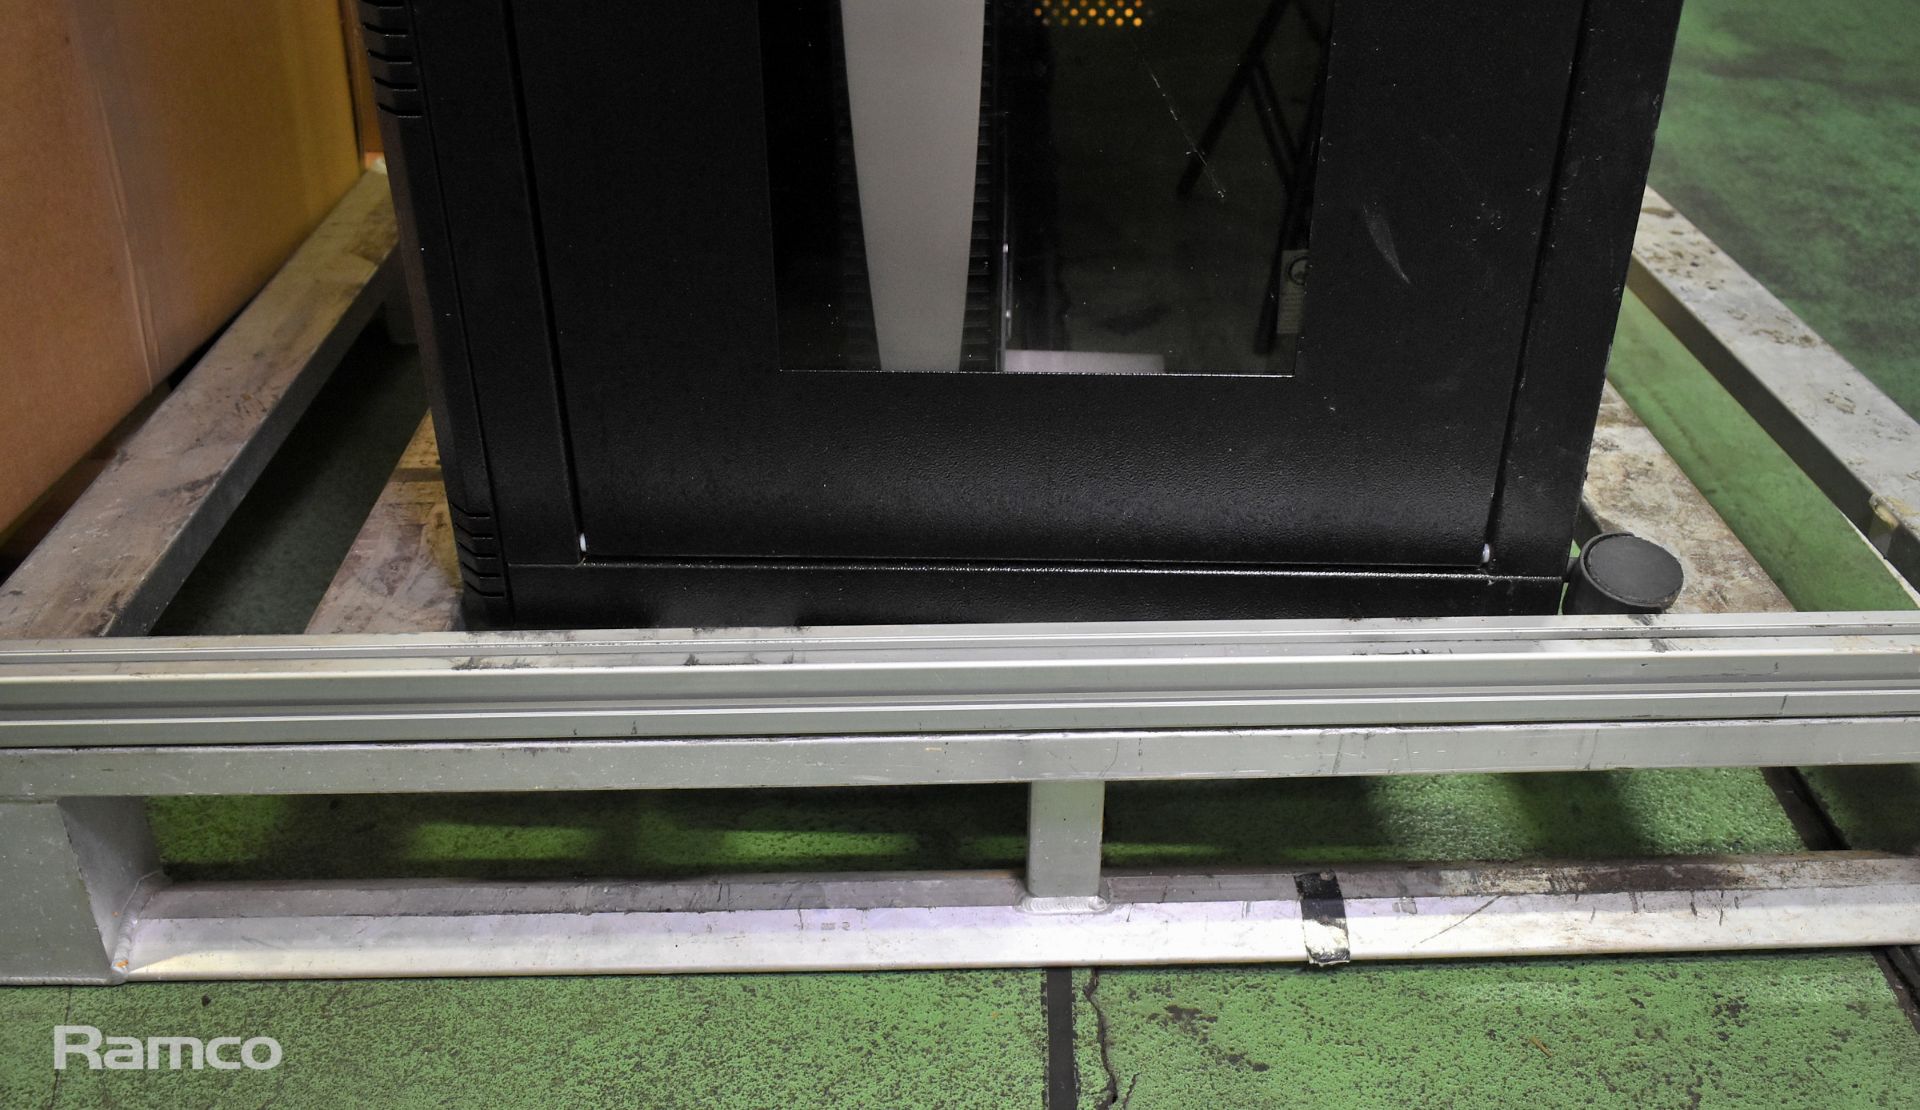 Riello Vision Dual UPS in server rack - W 600 x D 800 x H 600 mm - damage to castors - Image 5 of 5